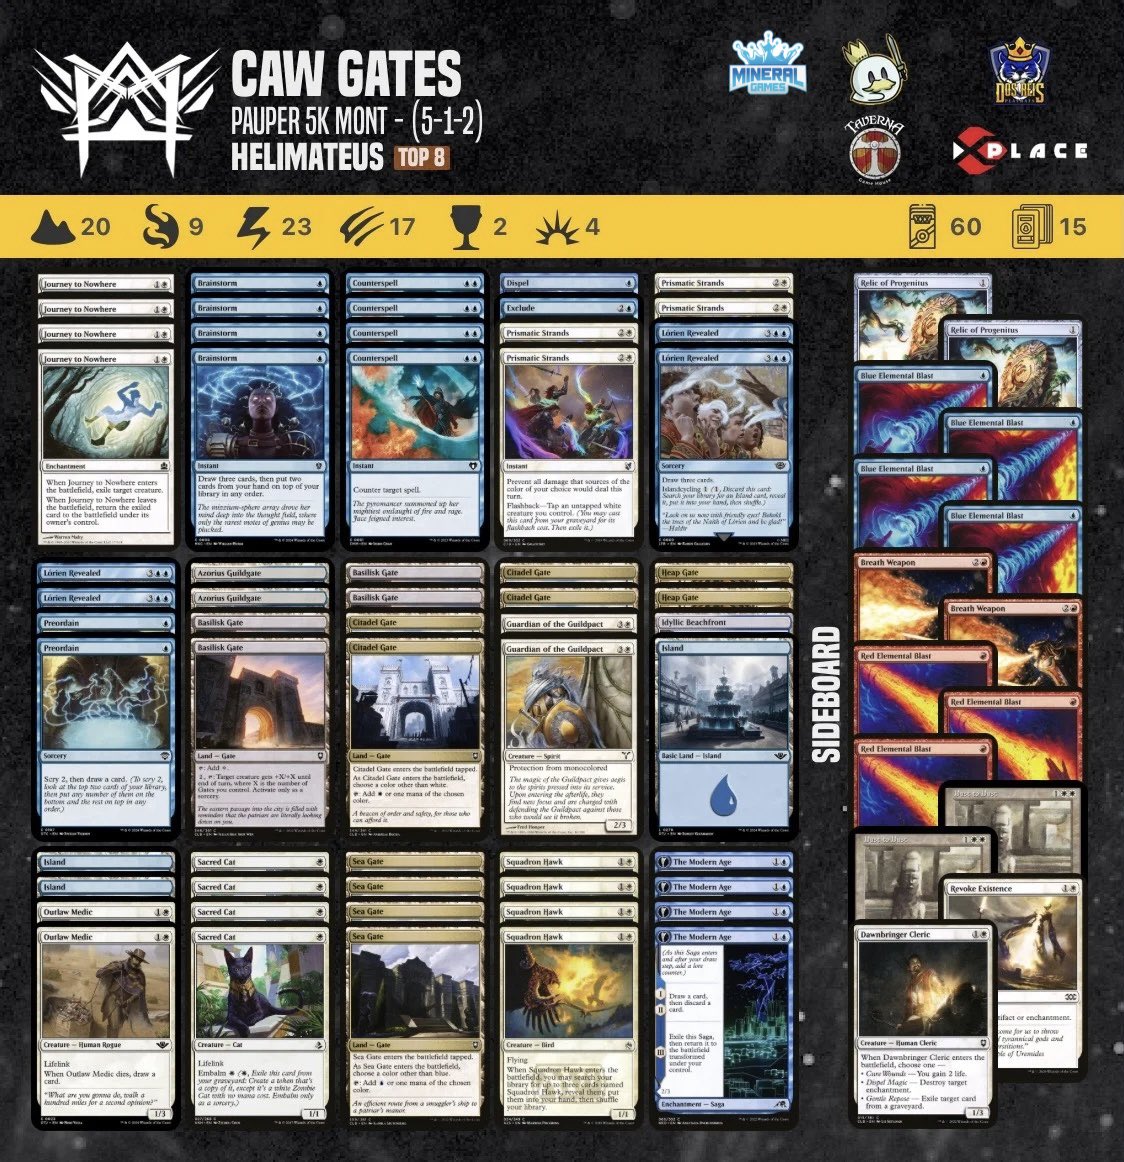 Our athlete HeliMateus achieved a 5-1-2 in the Pauper 5k Mont tournament with this Caw Gates decklist.

#pauper  #magic #mtgcommon #metagamepauper #mtgpauper #magicthegathering #wizardsofthecoast 

@PauperDecklists @fireshoes